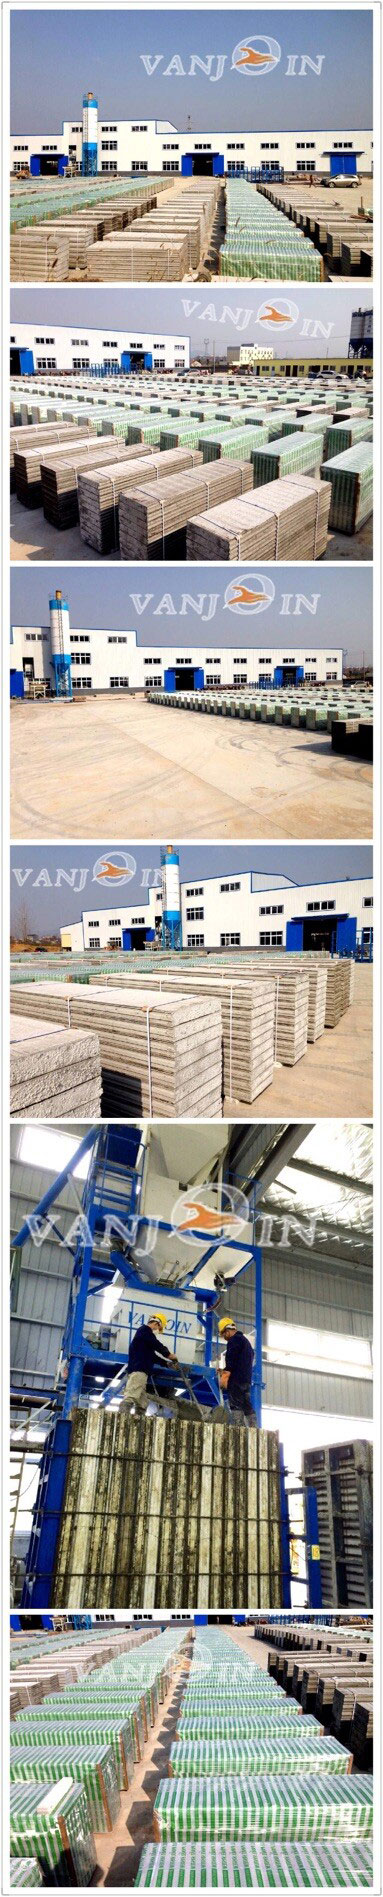 The Completion & Start-up Production of Our New Factory